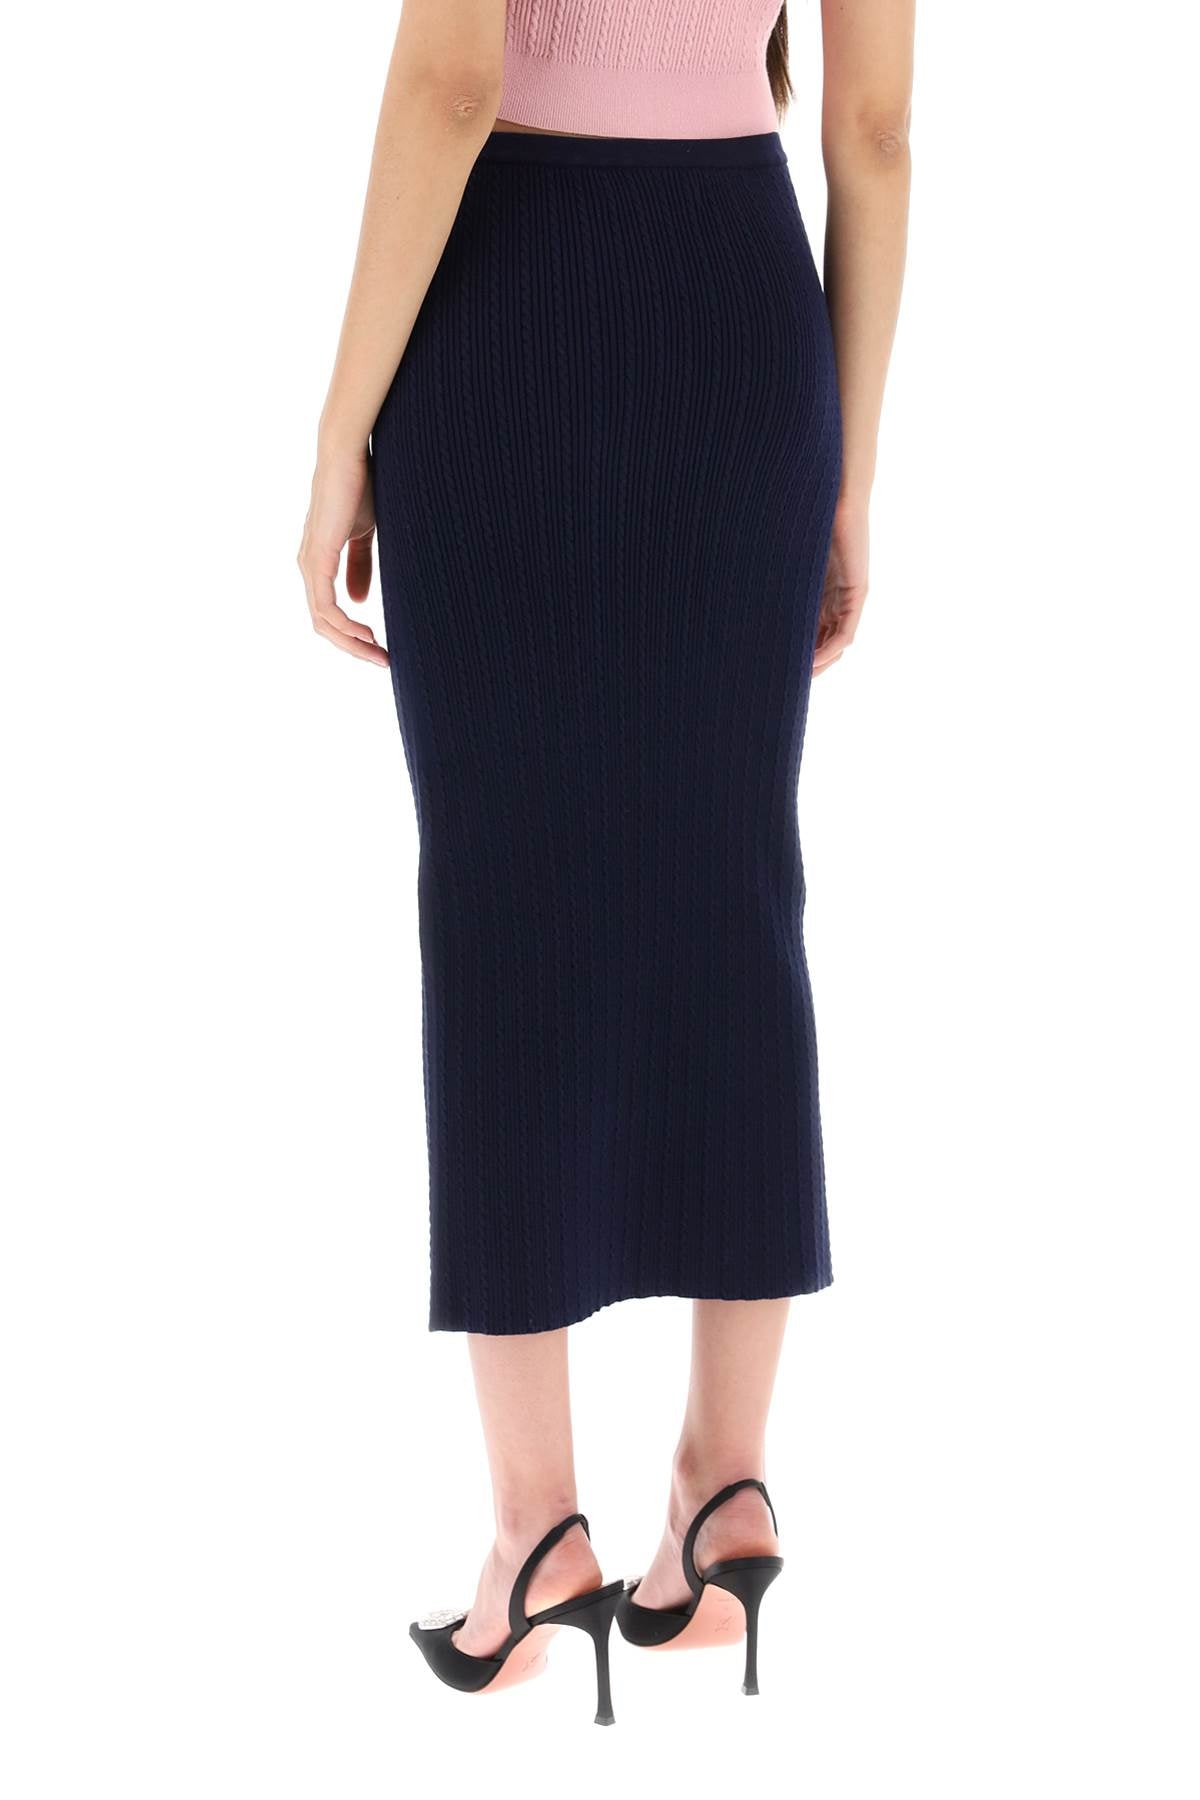 Alessandra rich knitted pencil skirt-2